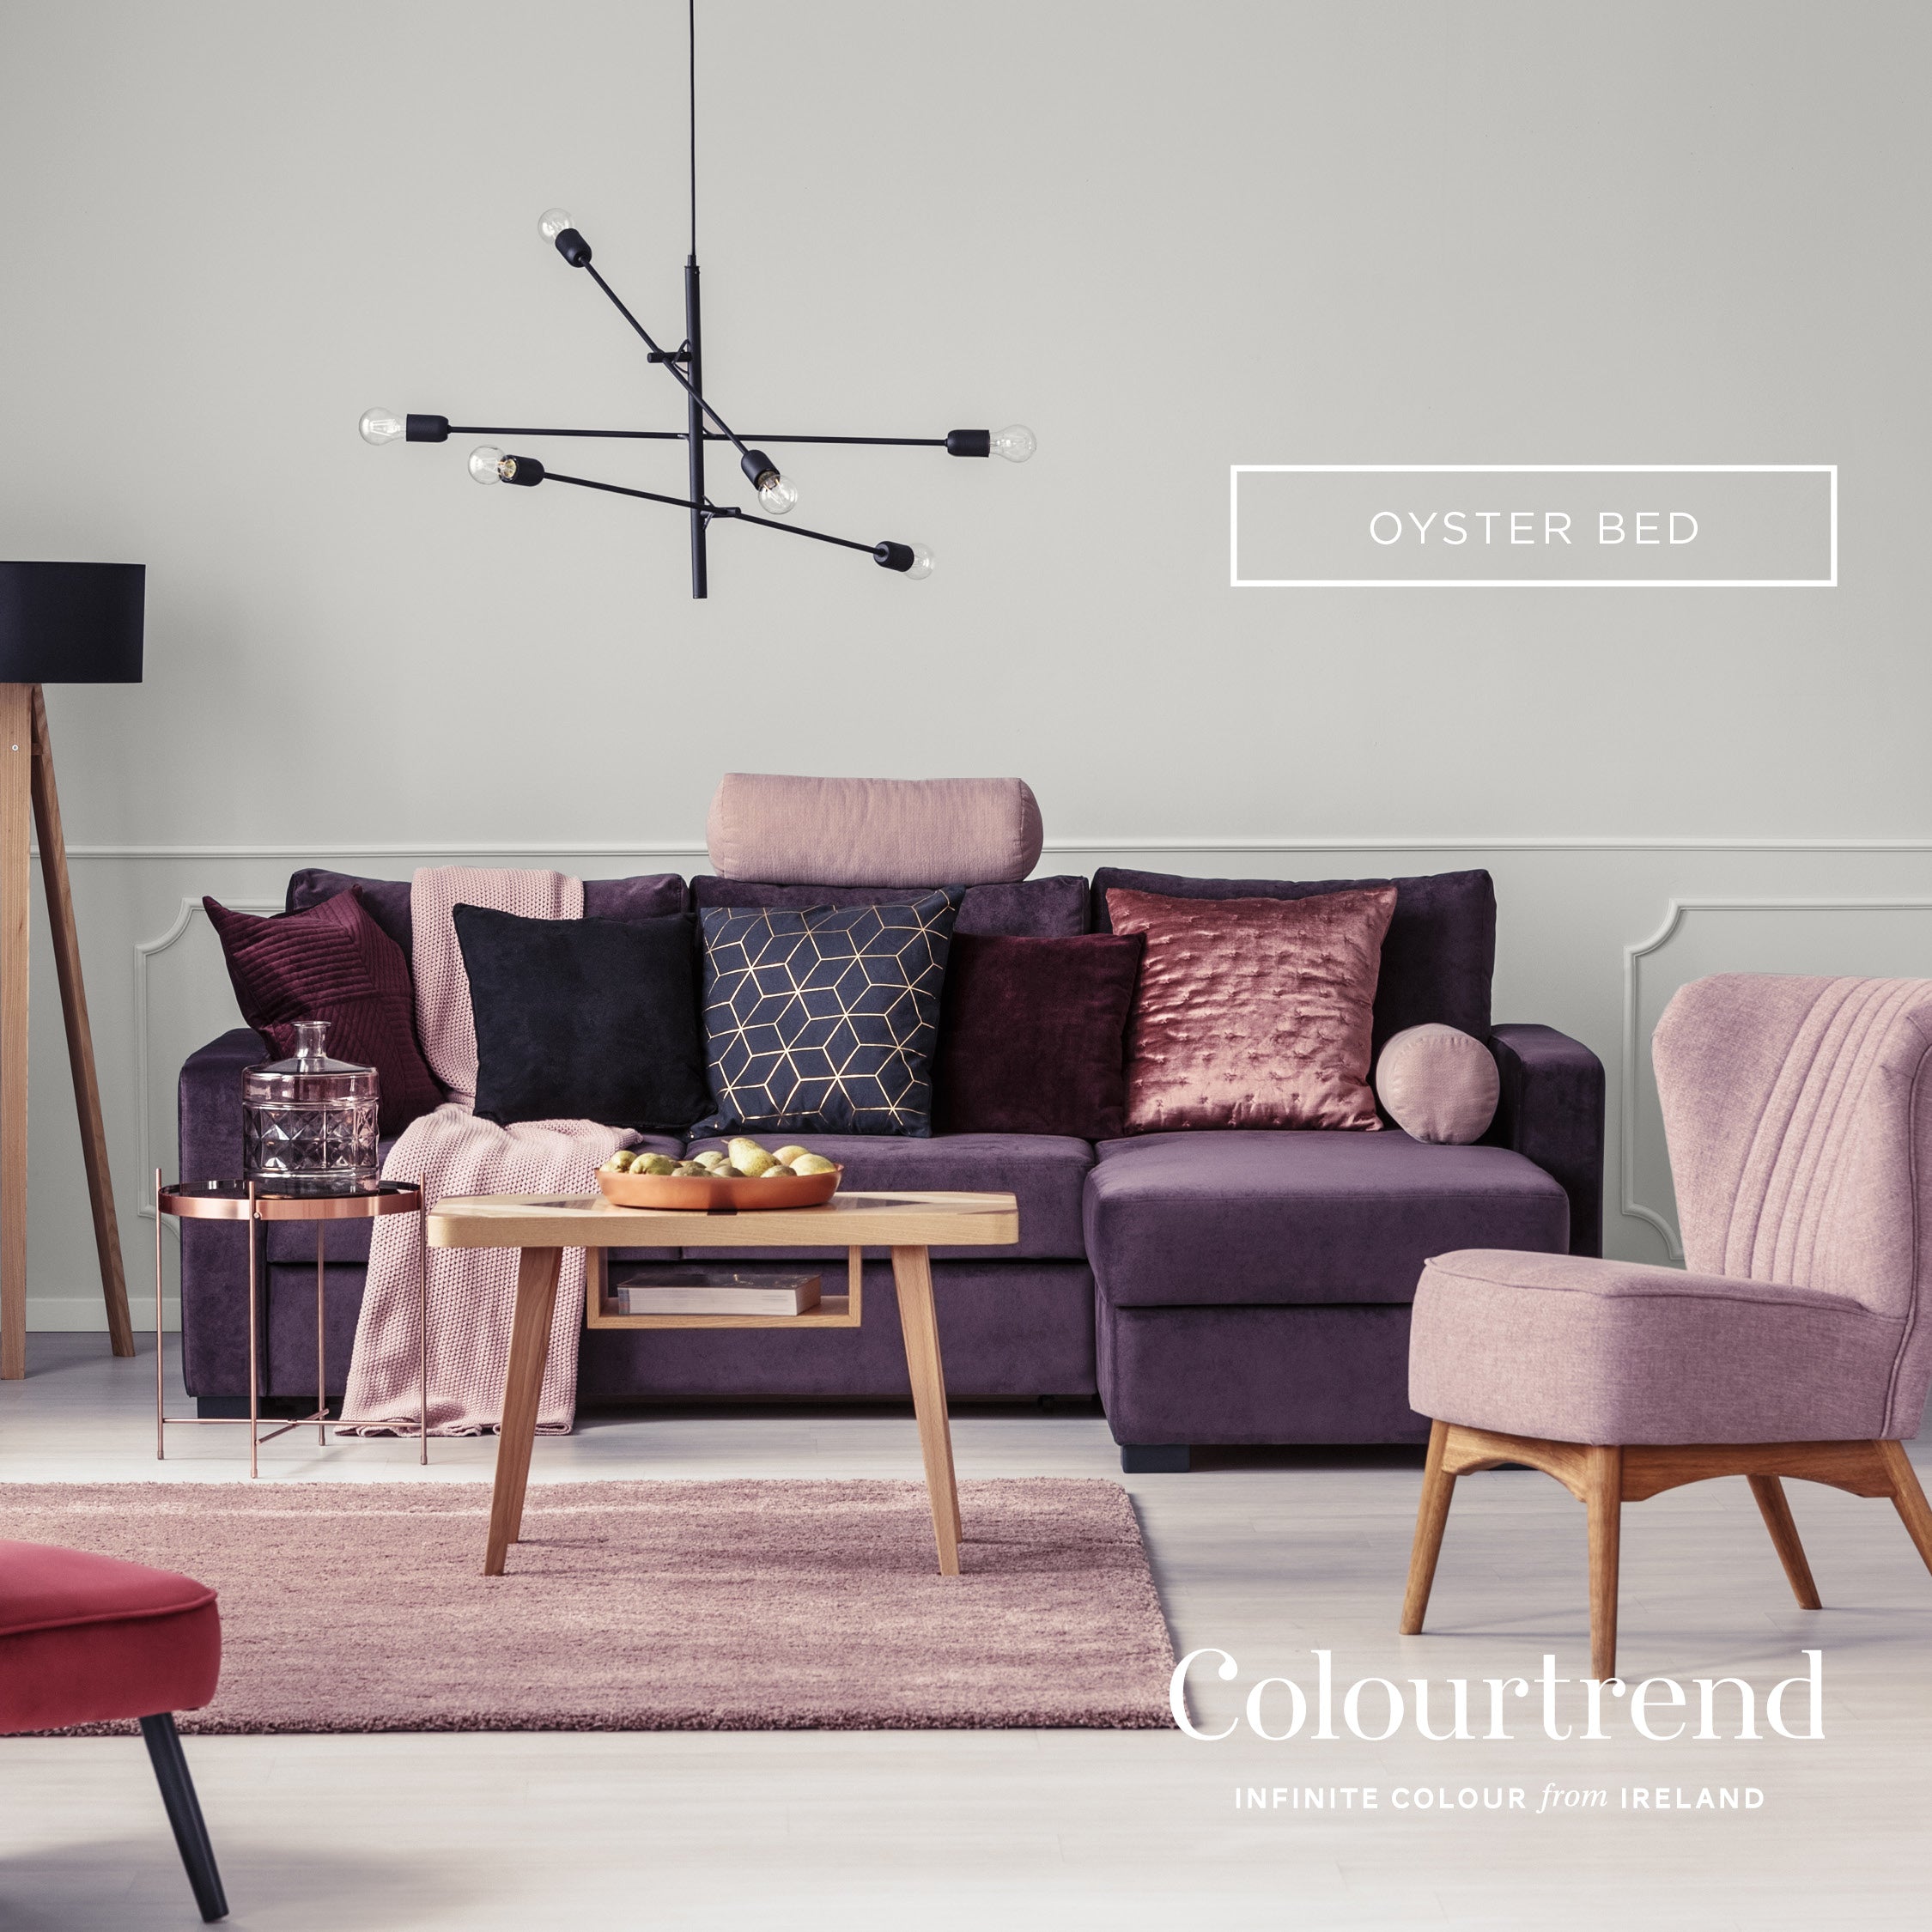 Oyster Bed by Colourtrend - Order Beautiful Paints from our